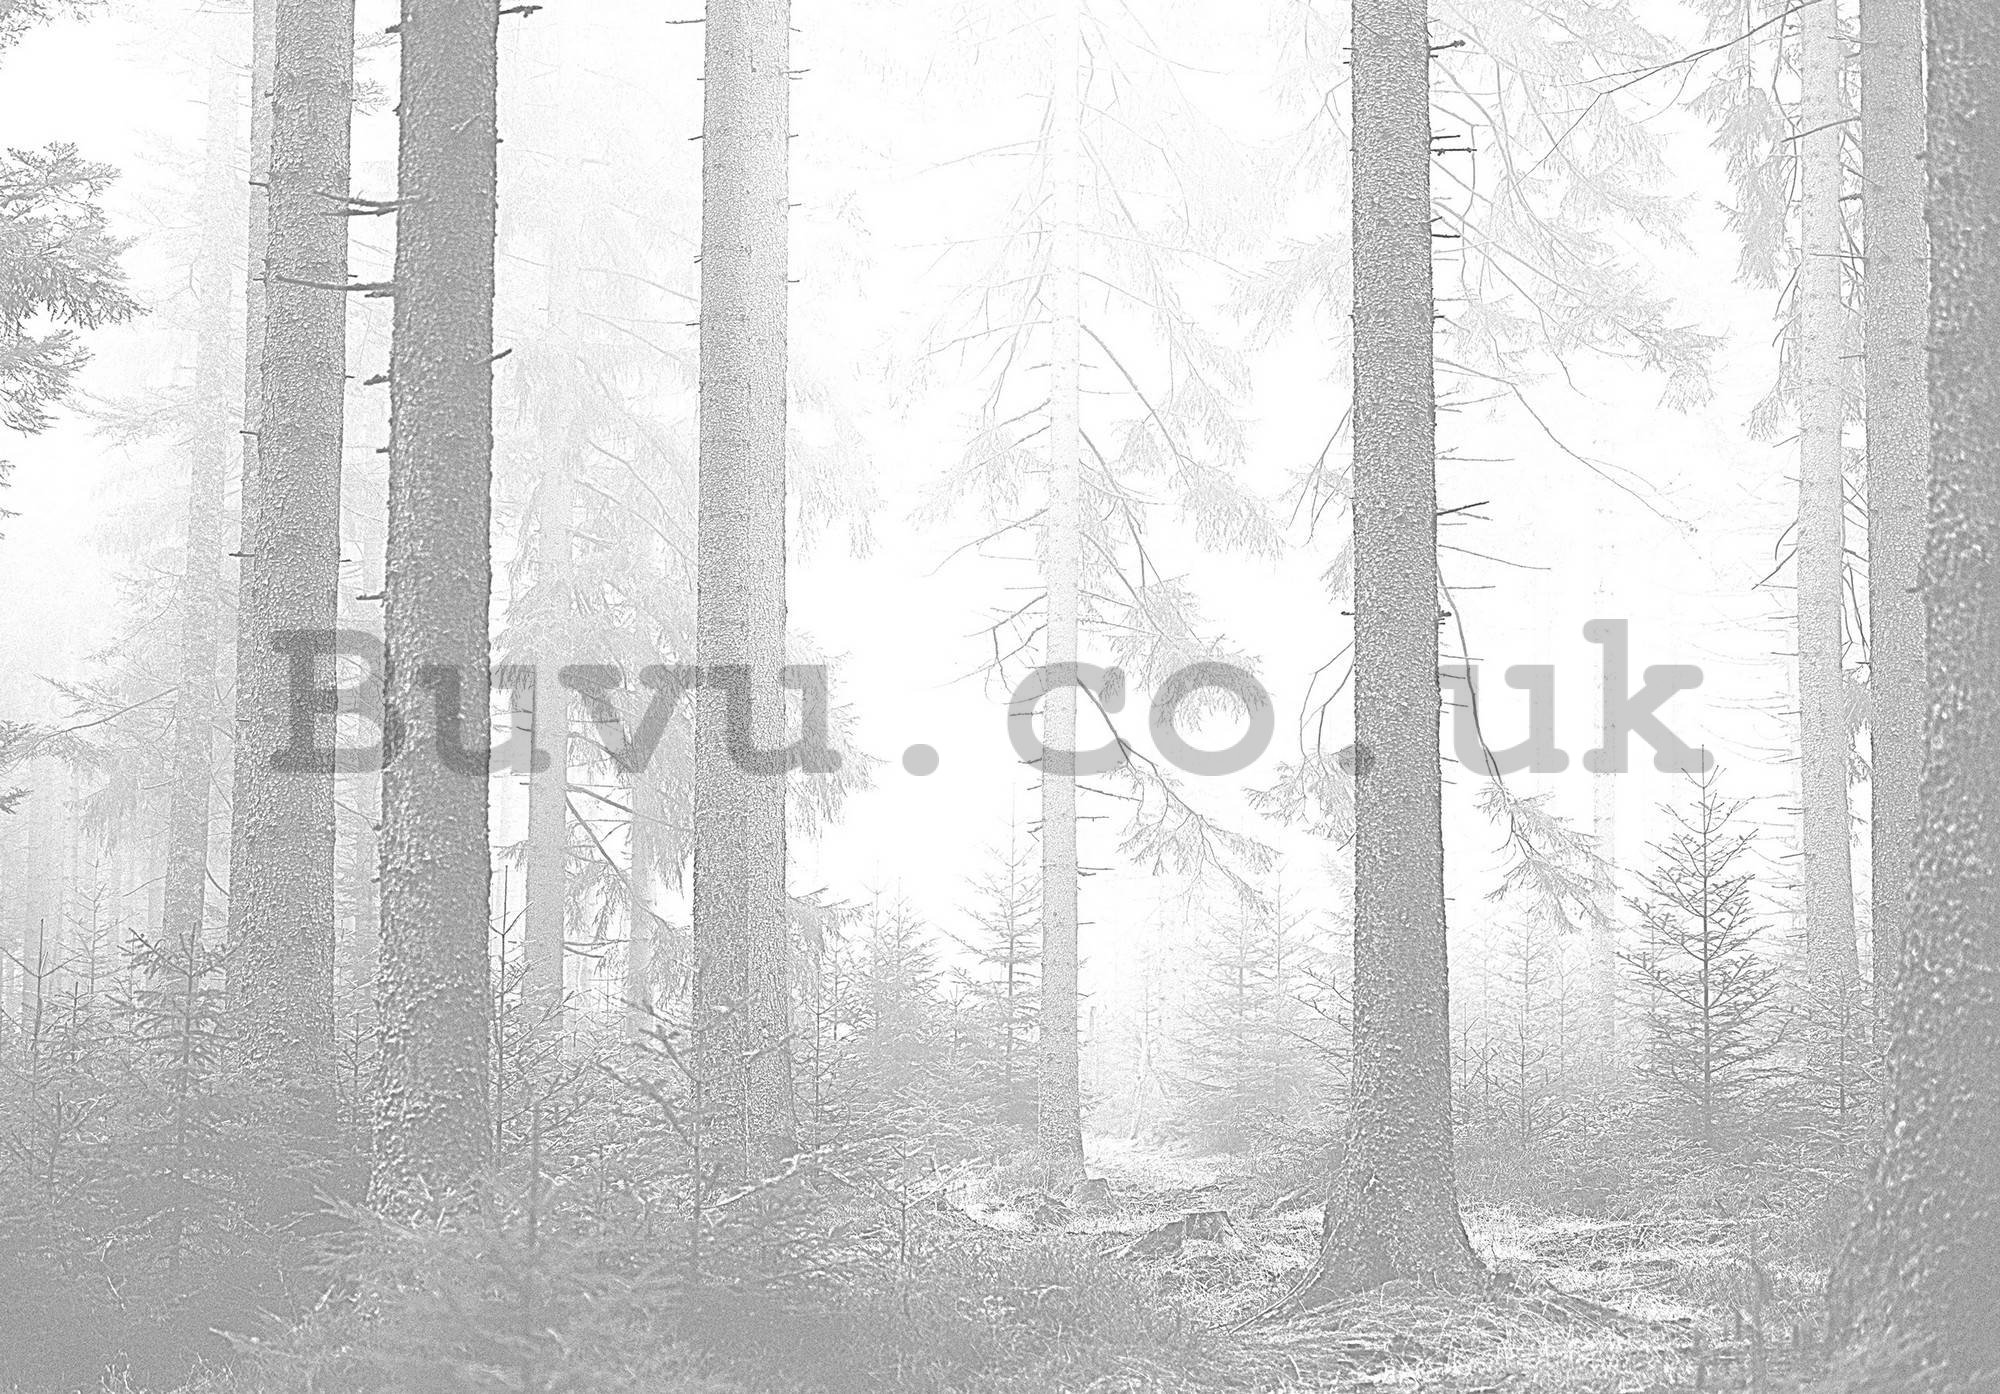 Wall mural vlies: Black and white forest (3) - 152,5x104 cm